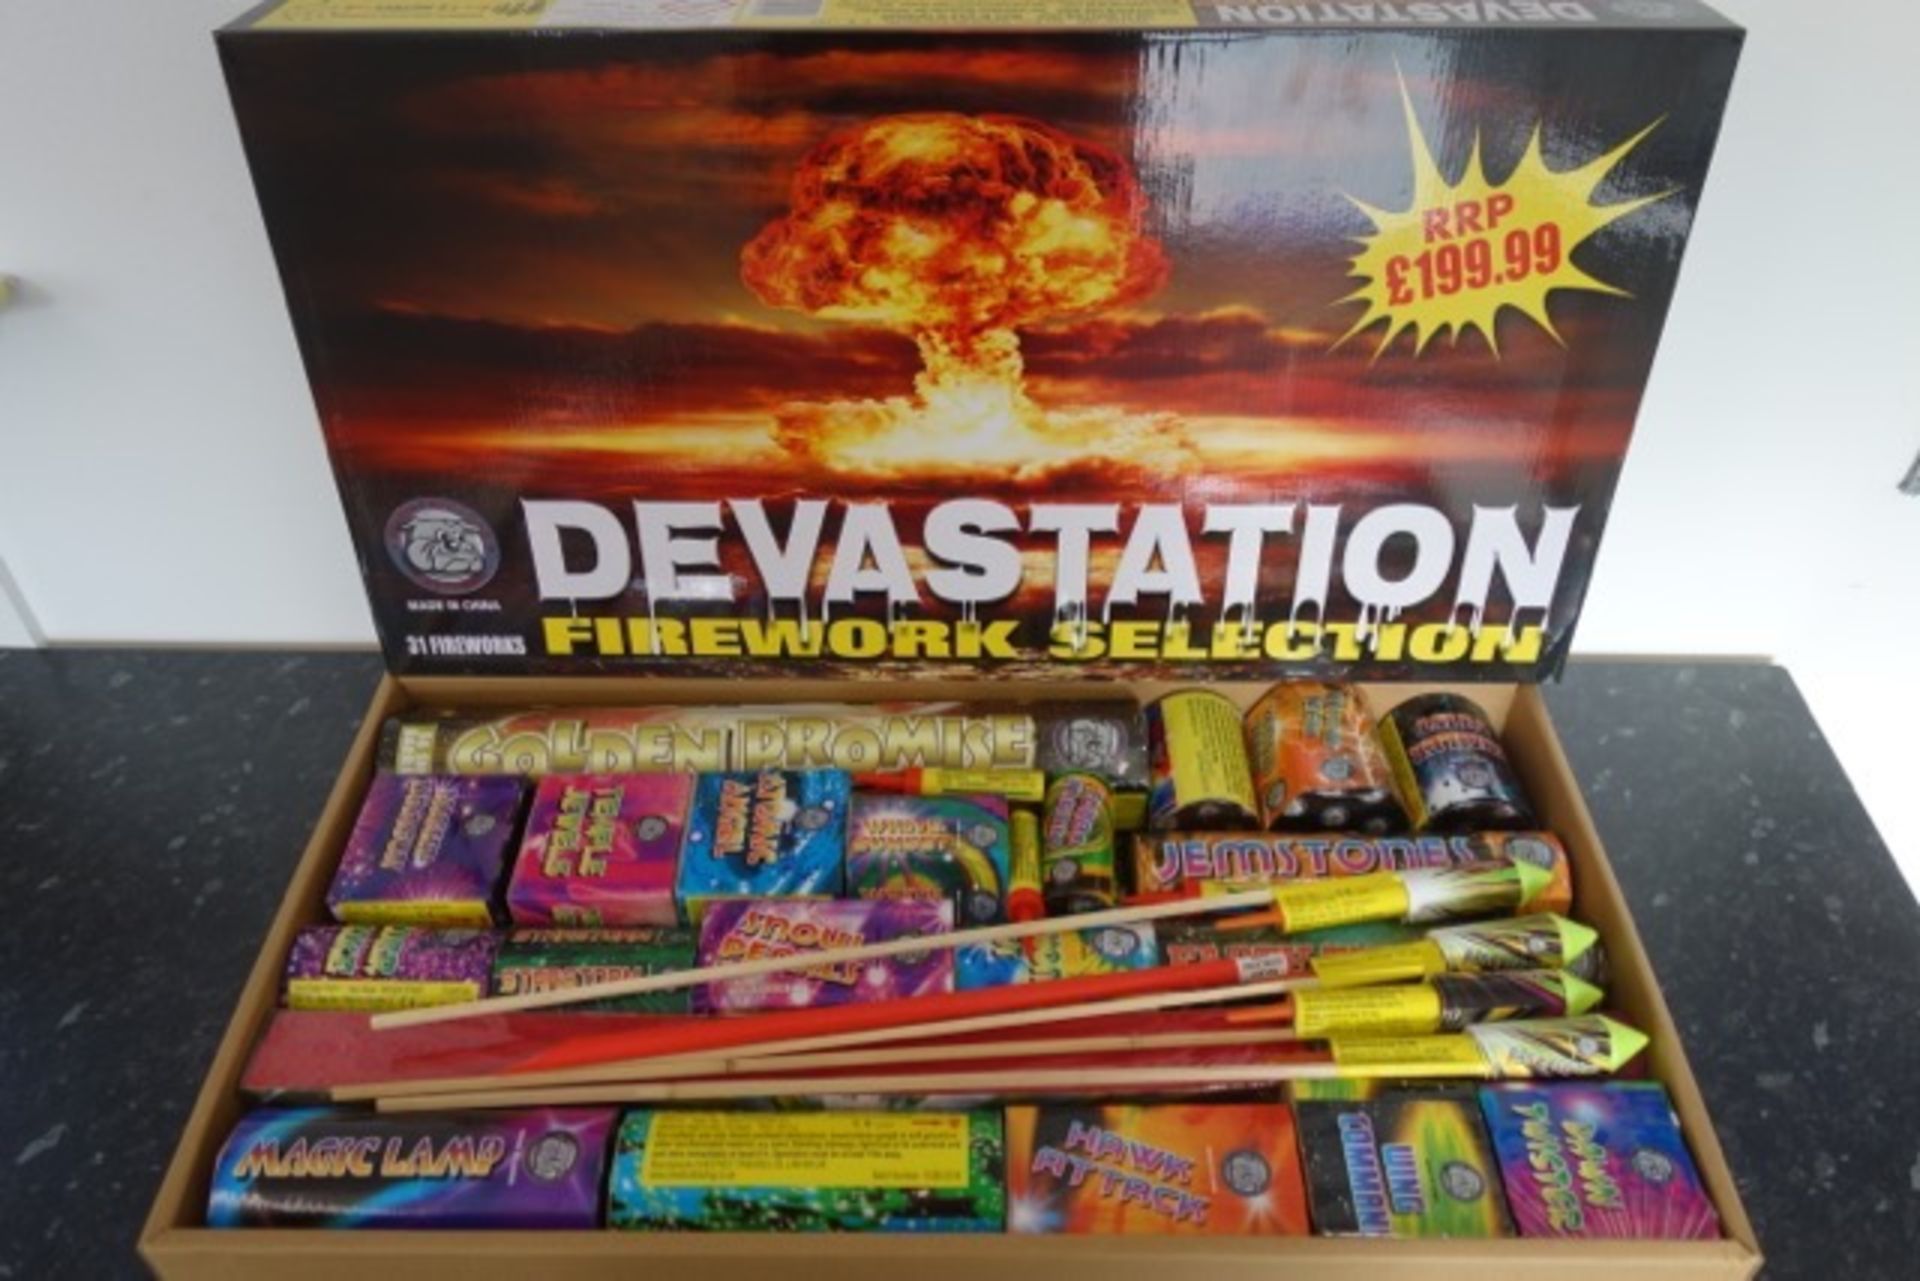 3 x DEVASTATION ULTIMATE SELECTION BOX BY BRITISH BULLDOG FIREWORK COMPANY - THIS YEARS NEW LOOK